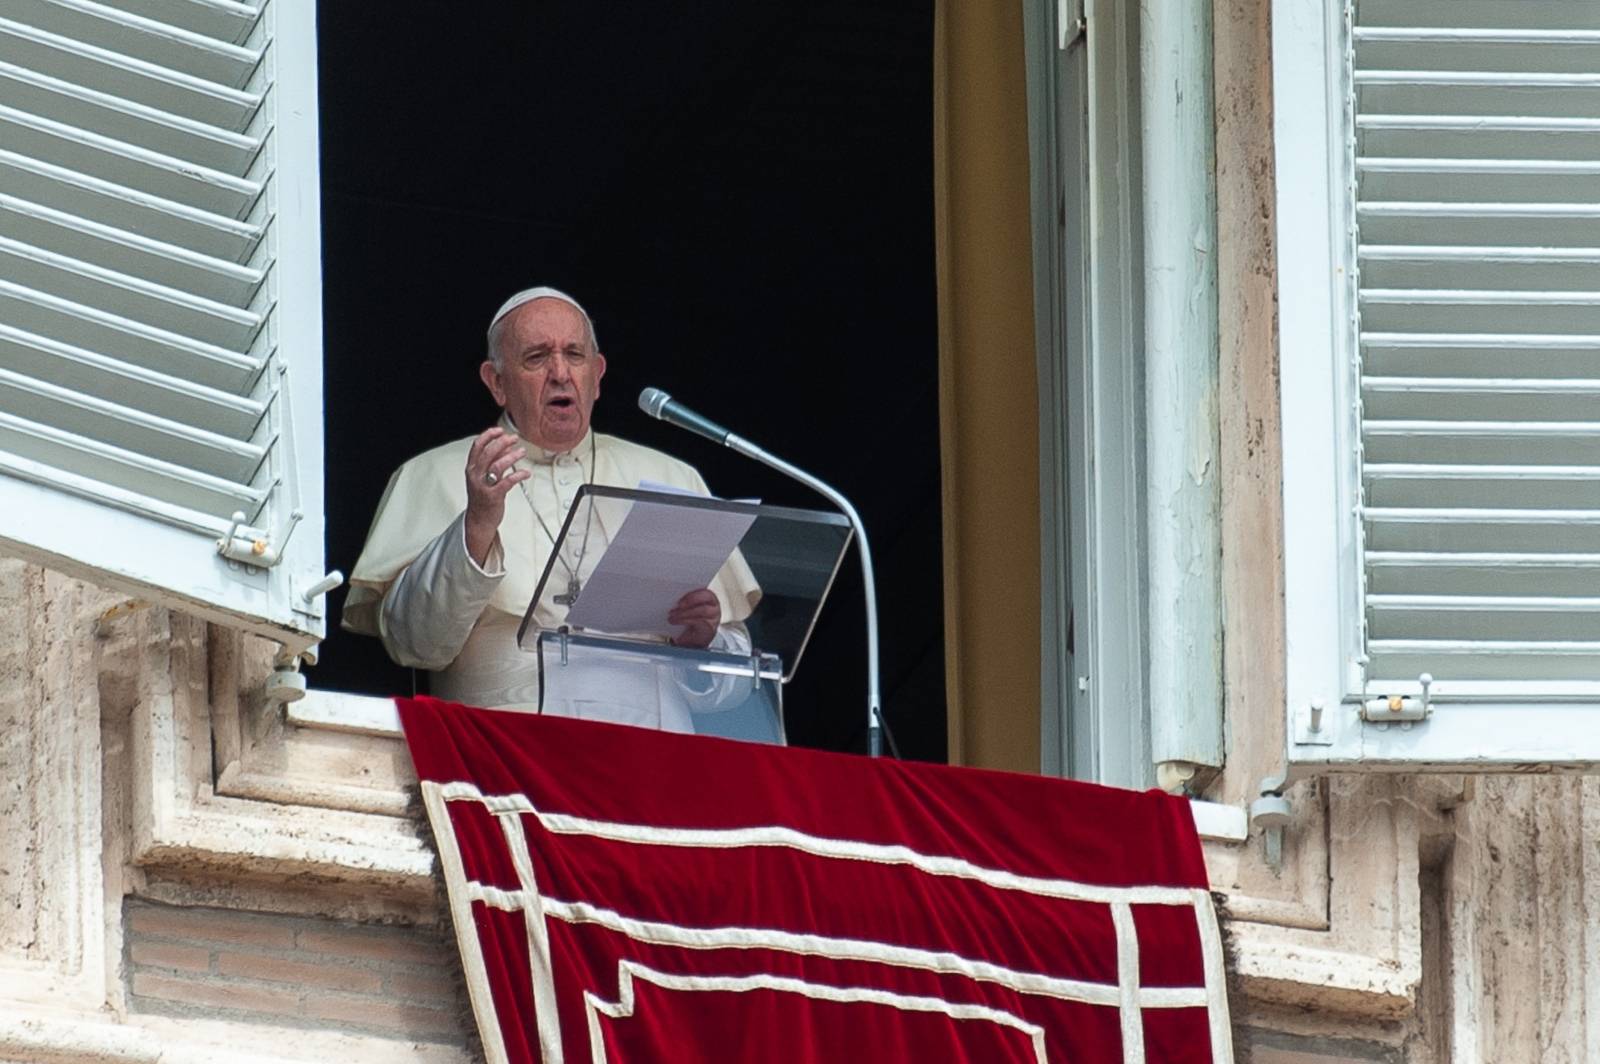 August 30, 2020 : Angelus noon prayer in St. Peter's Square in the Vatican.